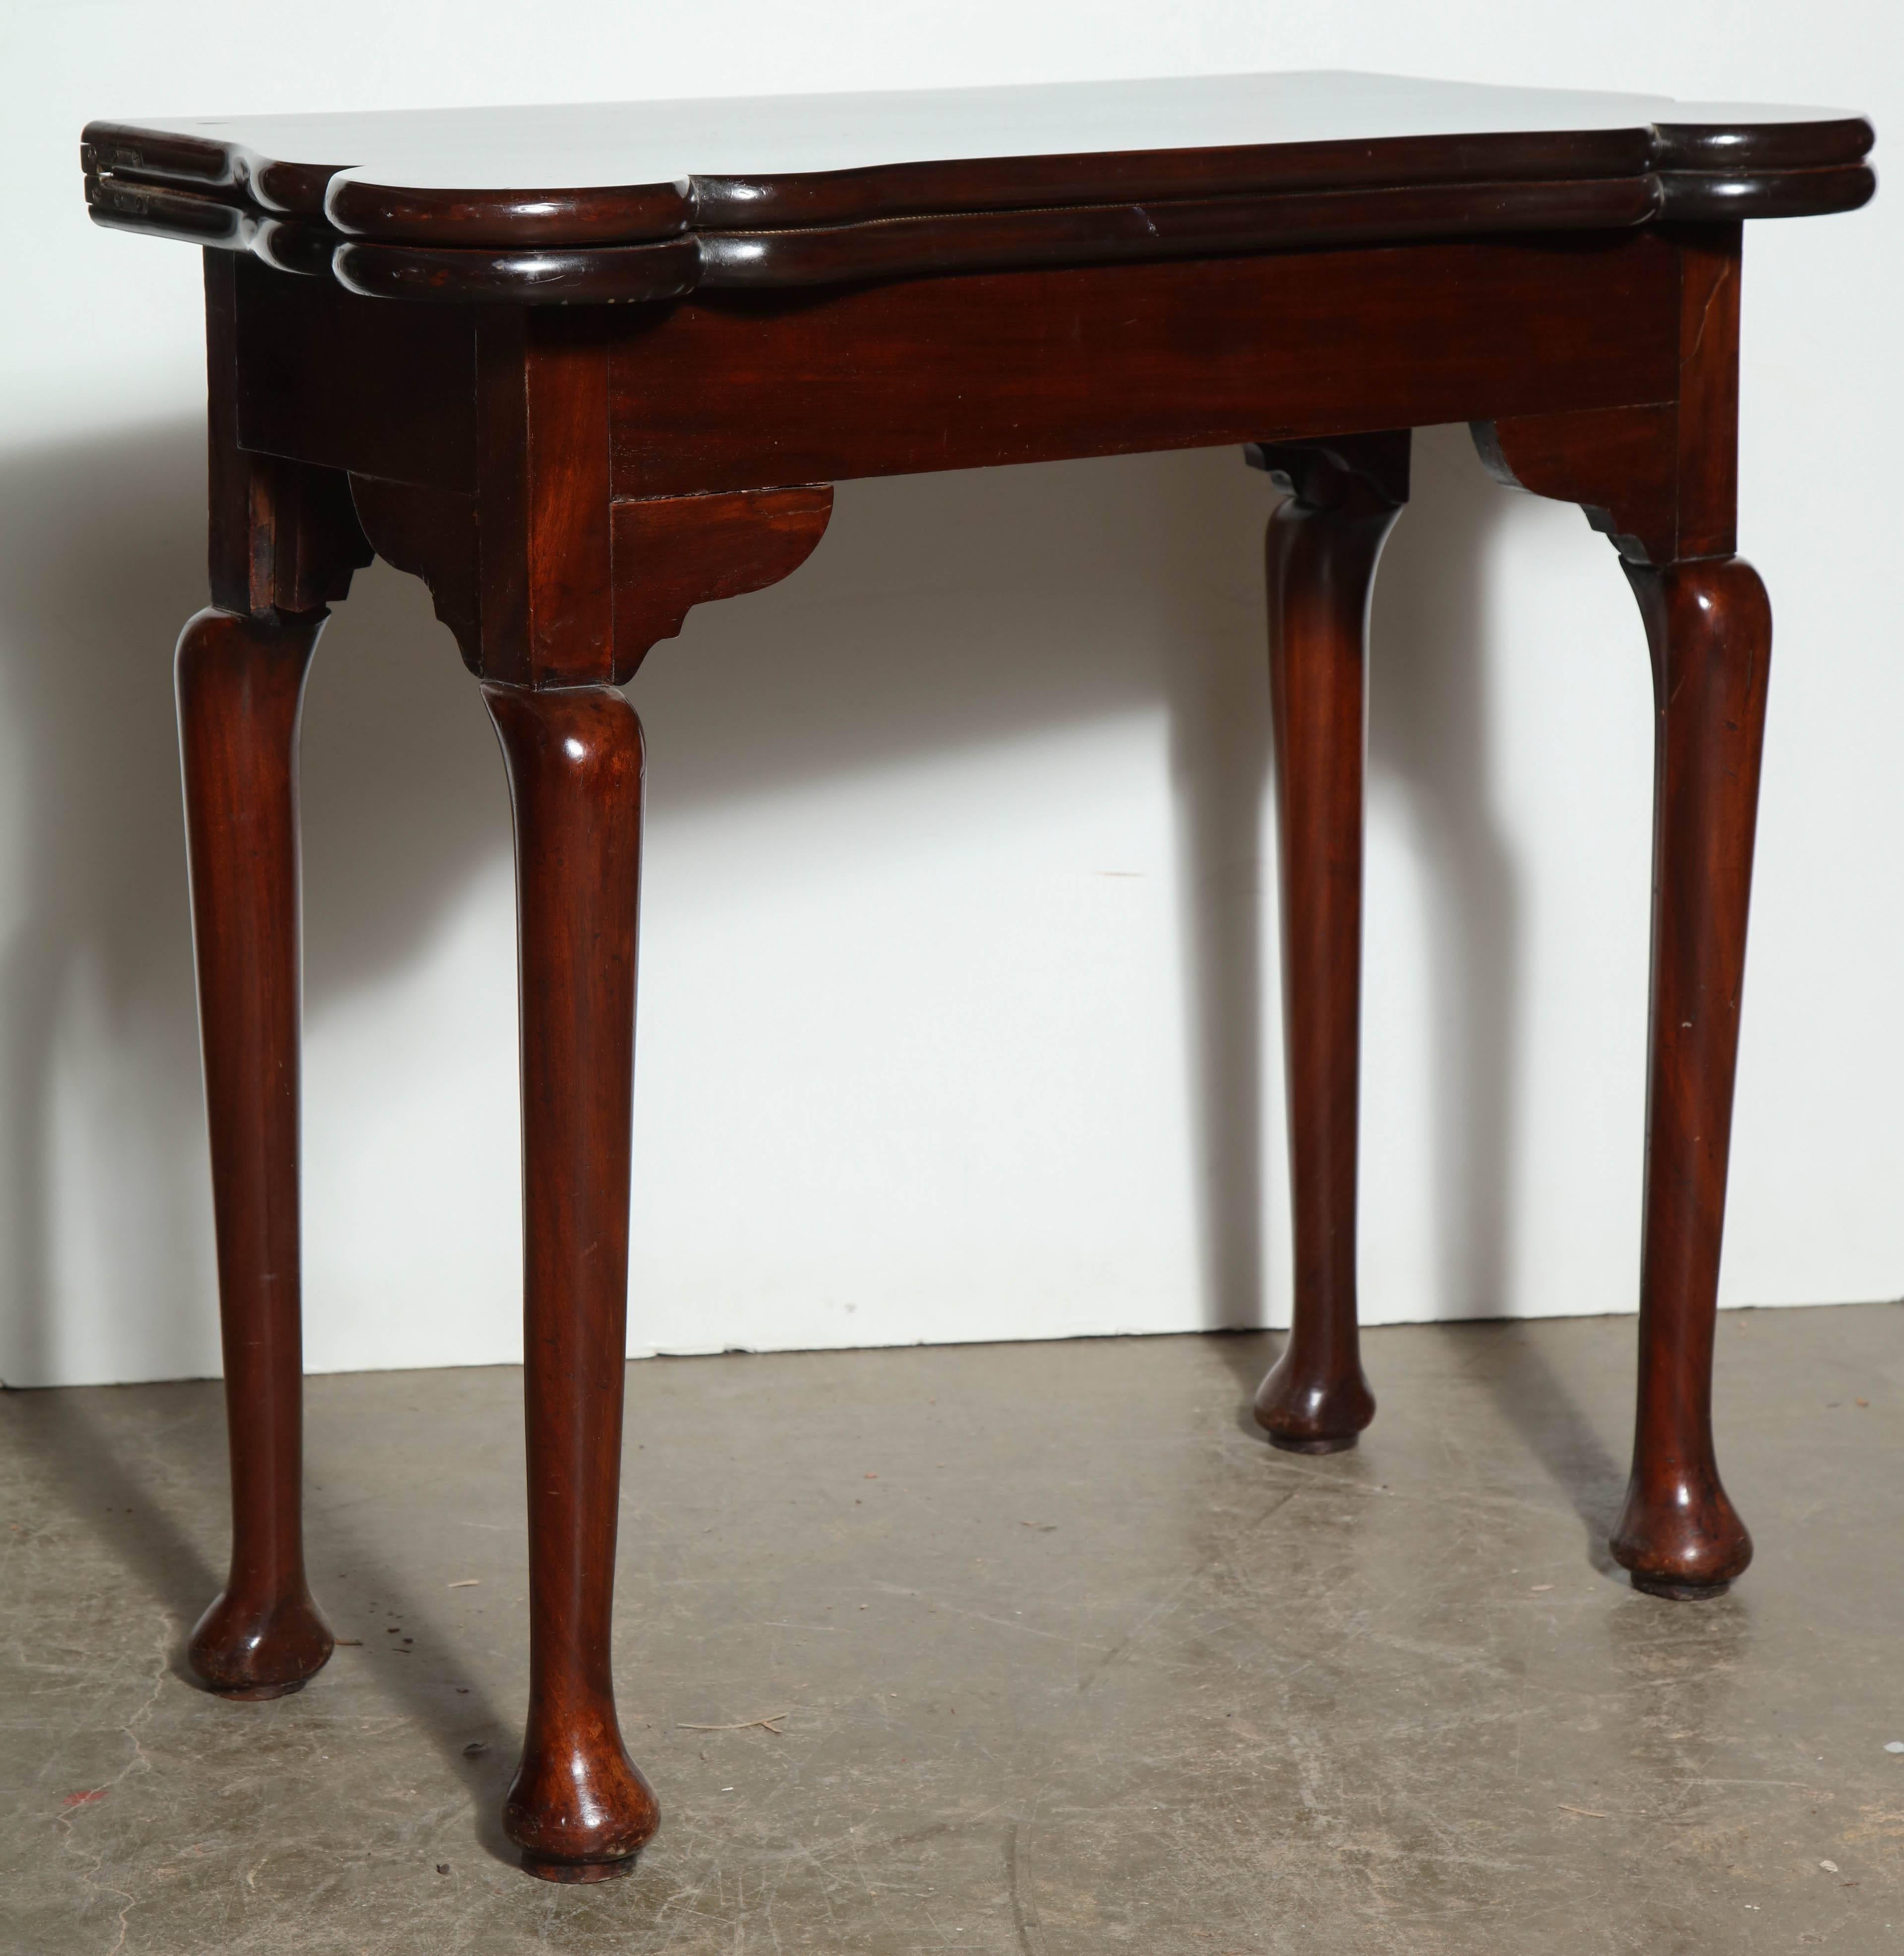 A rare English George I mahogany turret corner fold over game table with concertina action legs, fitted interior with candle and money recesses, floral upholstered top on turned legs and pad feet.